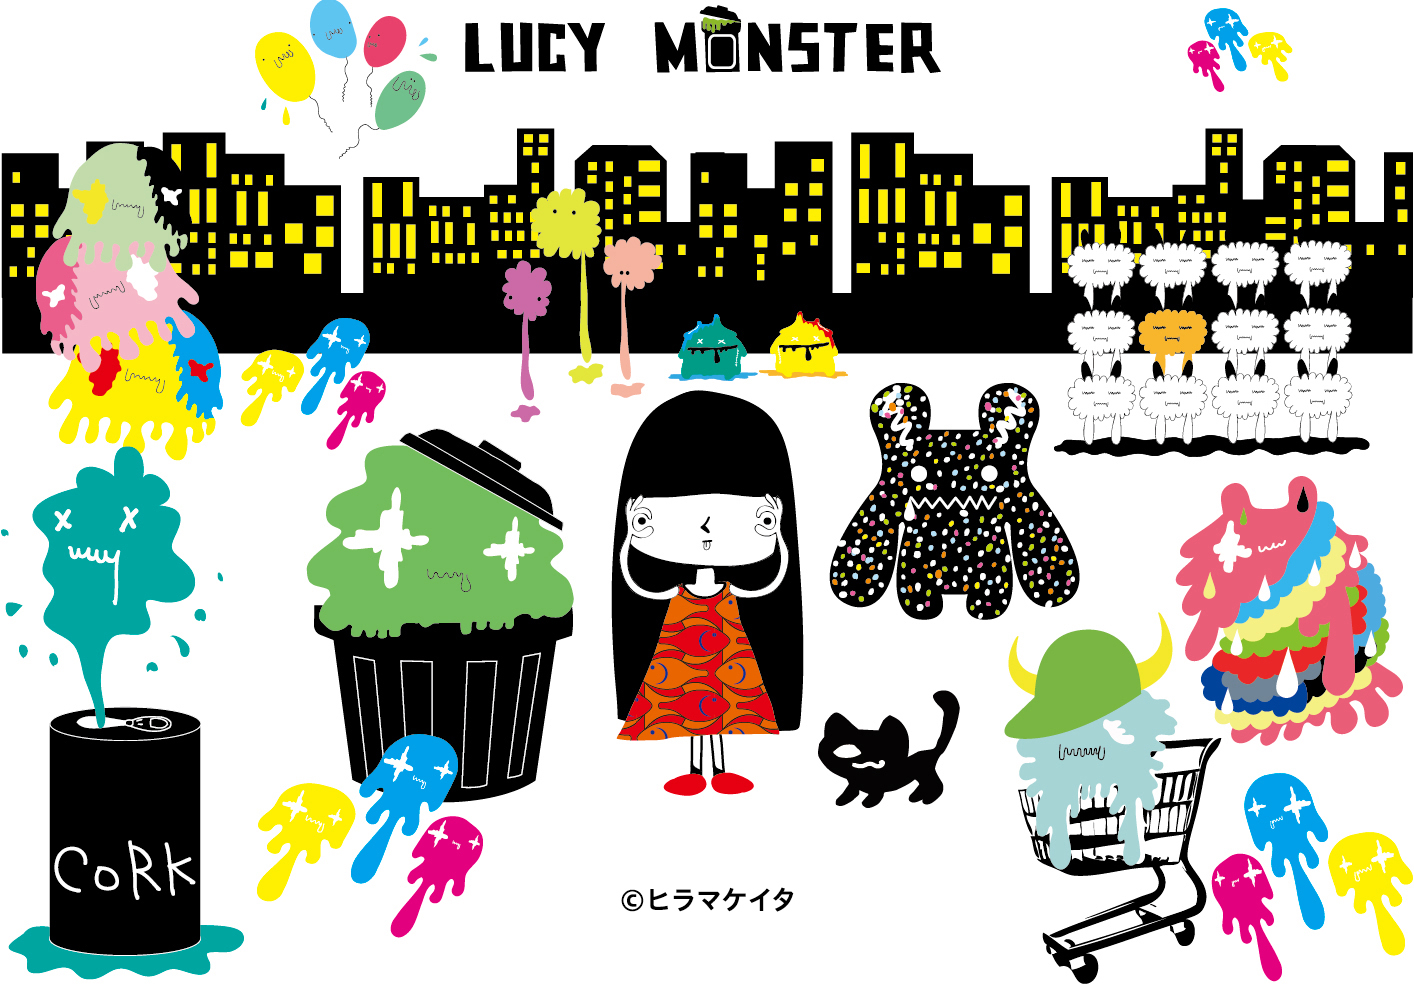 Lucy Monster